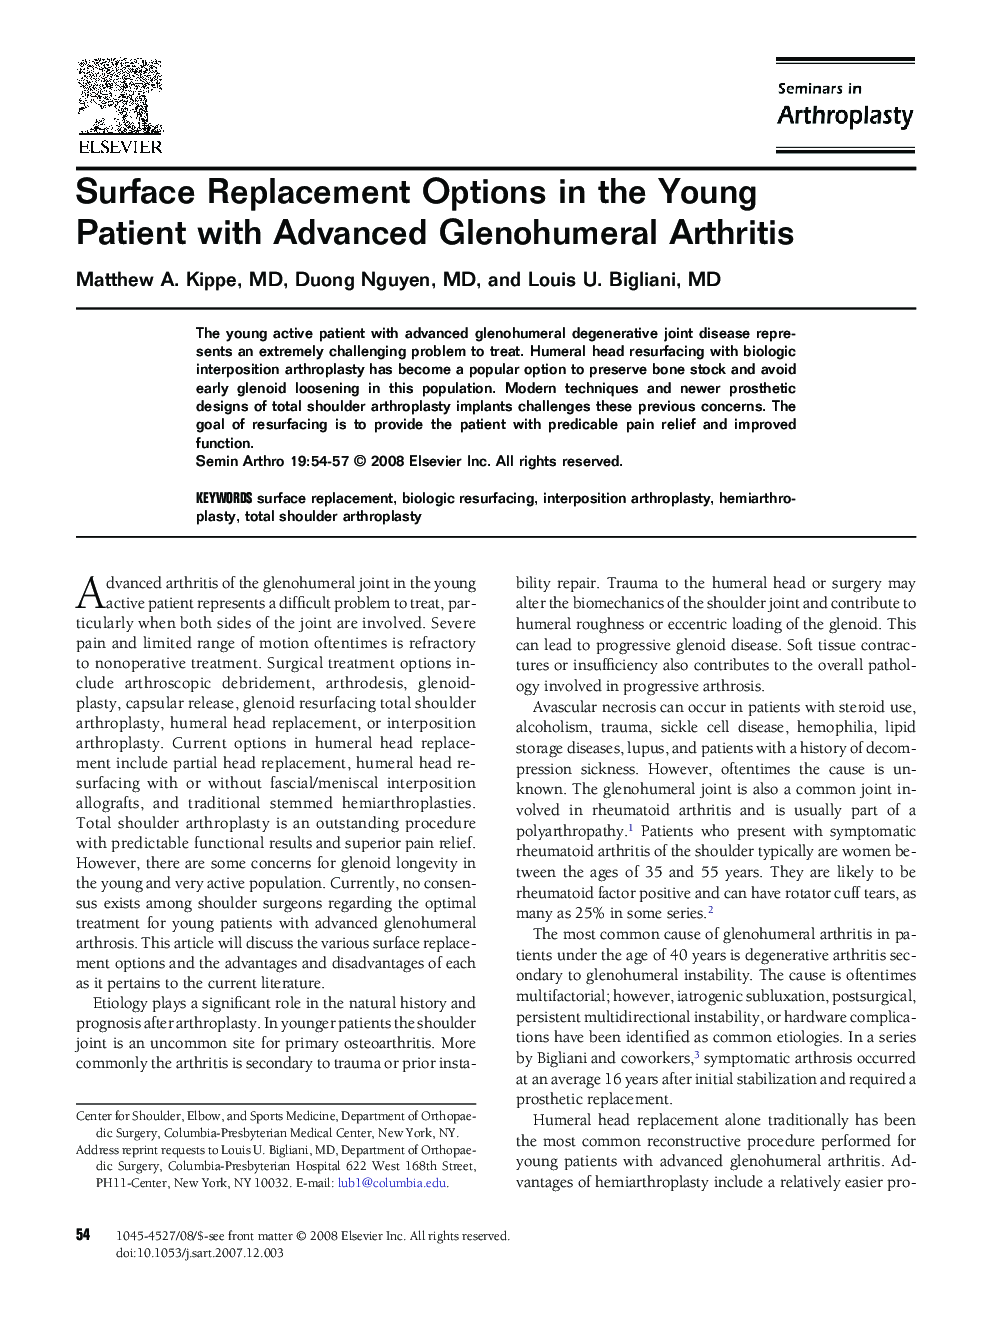 Surface Replacement Options in the Young Patient with Advanced Glenohumeral Arthritis